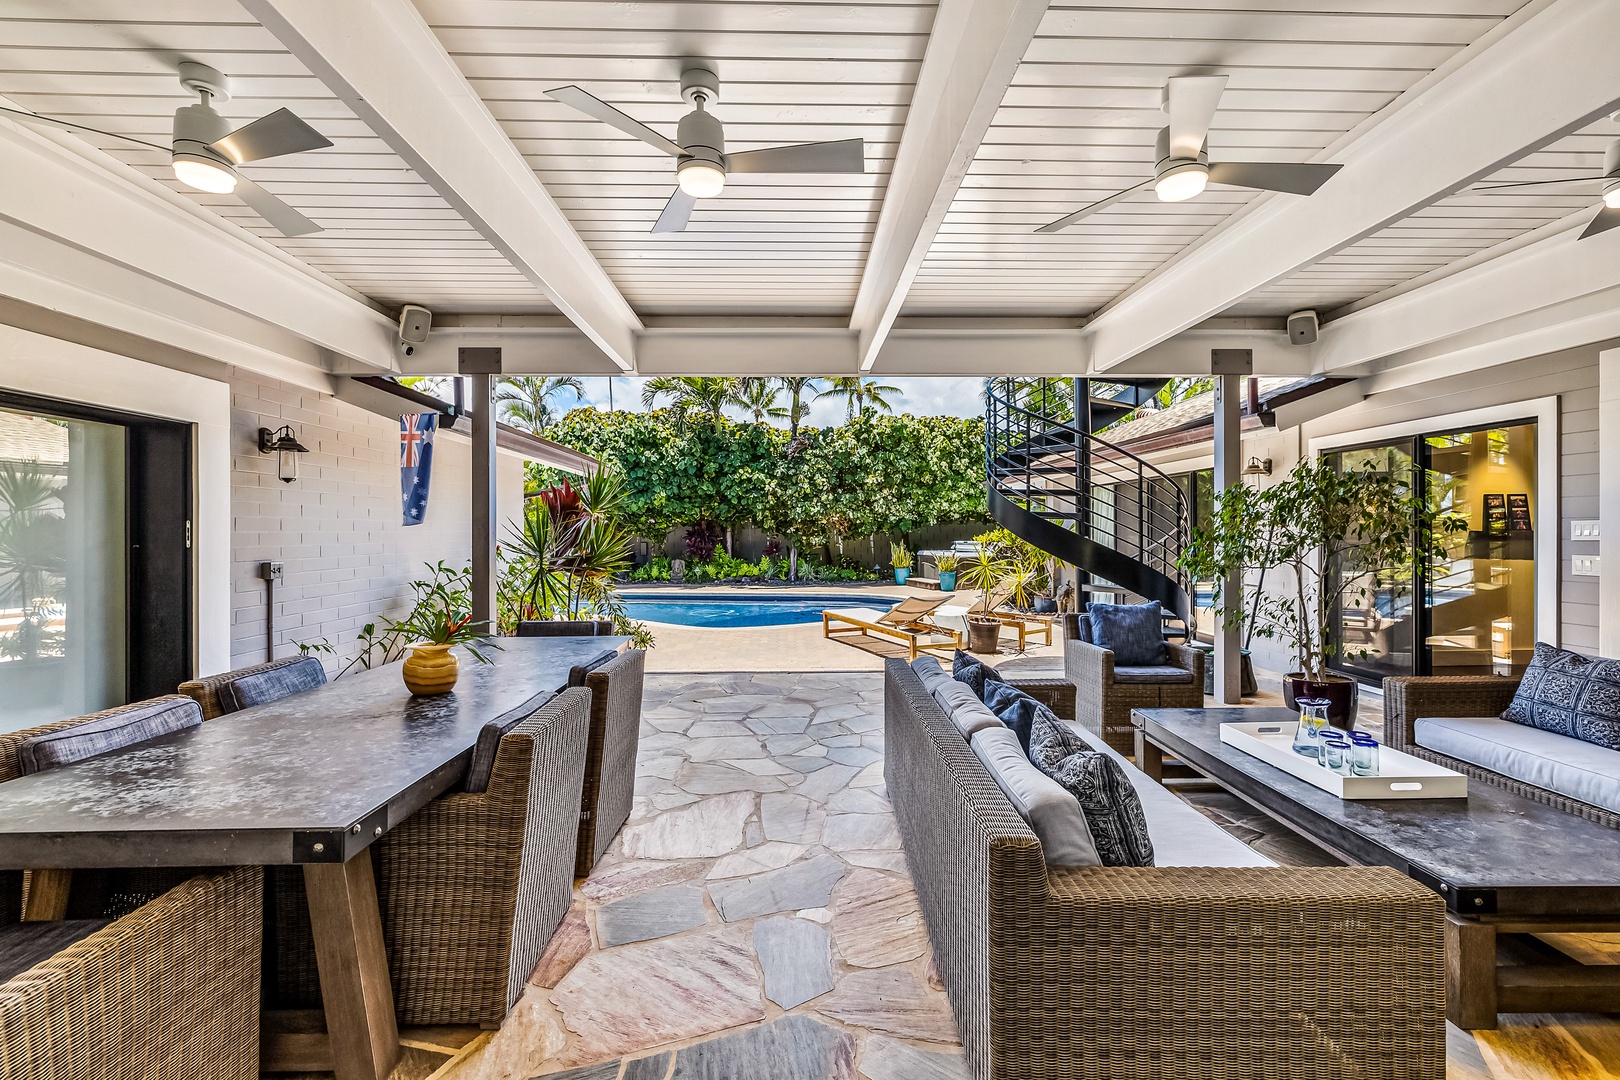 Kailua Vacation Rentals, Hale Ohana - Take a seat under the covered lanai with views of the pool and garden